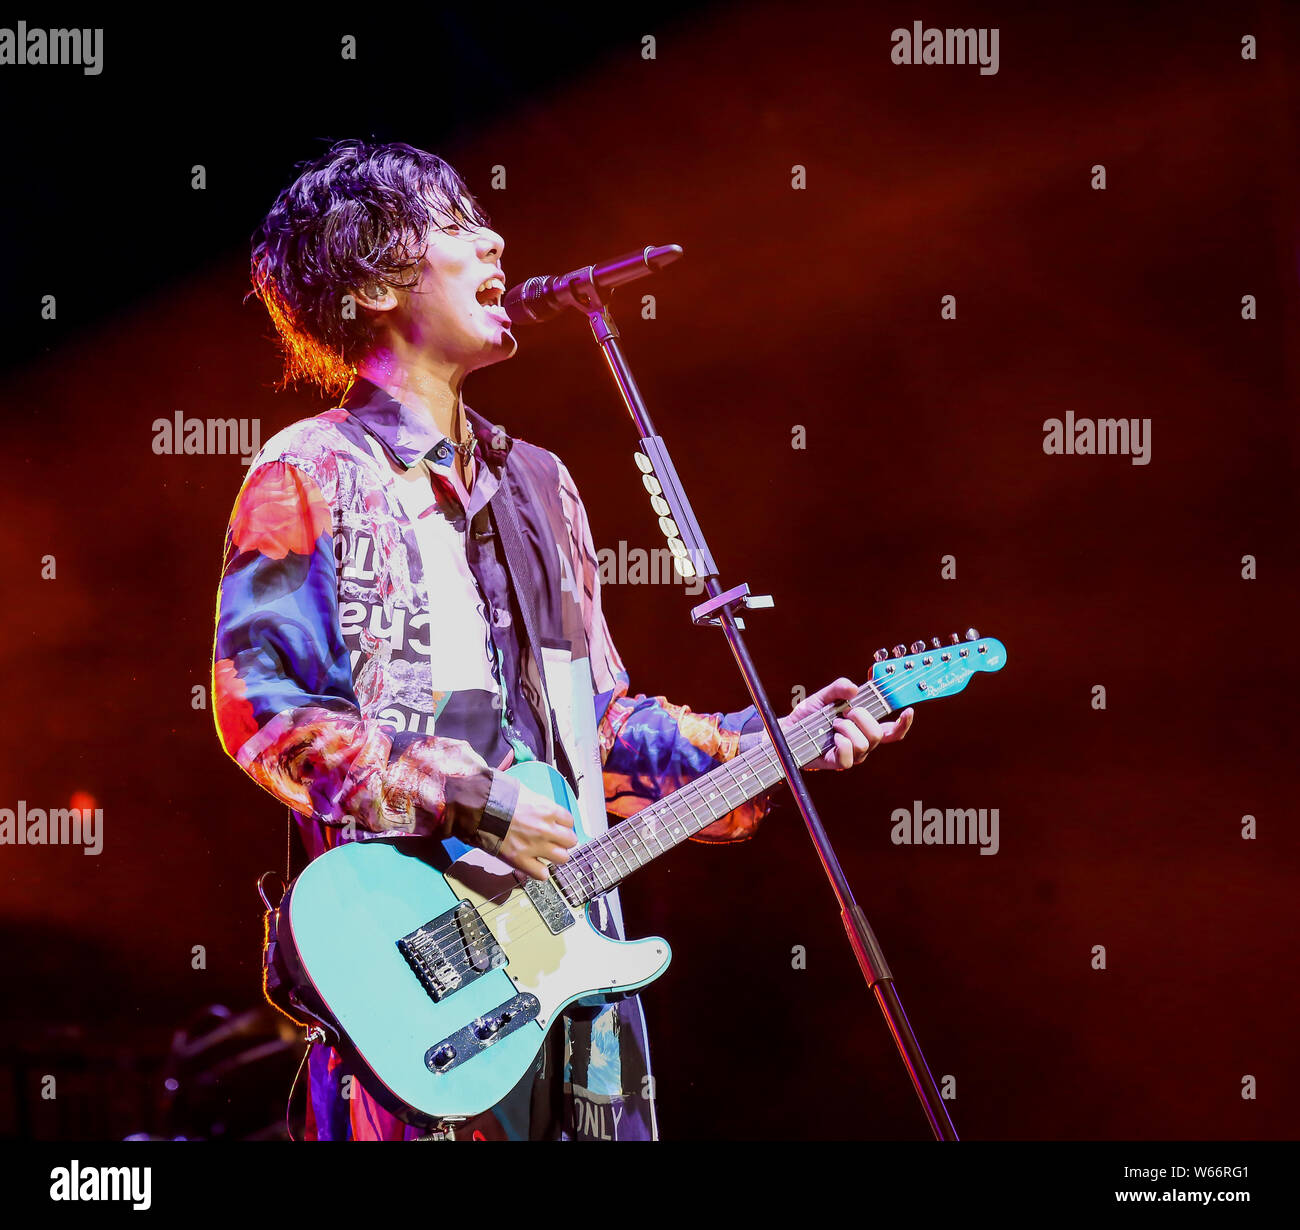 Members Of Japanese Rock Band Radwimps Perform During Radwimps Asia Live Tour 18 Concert In Shanghai China 11 July 18 Stock Photo Alamy